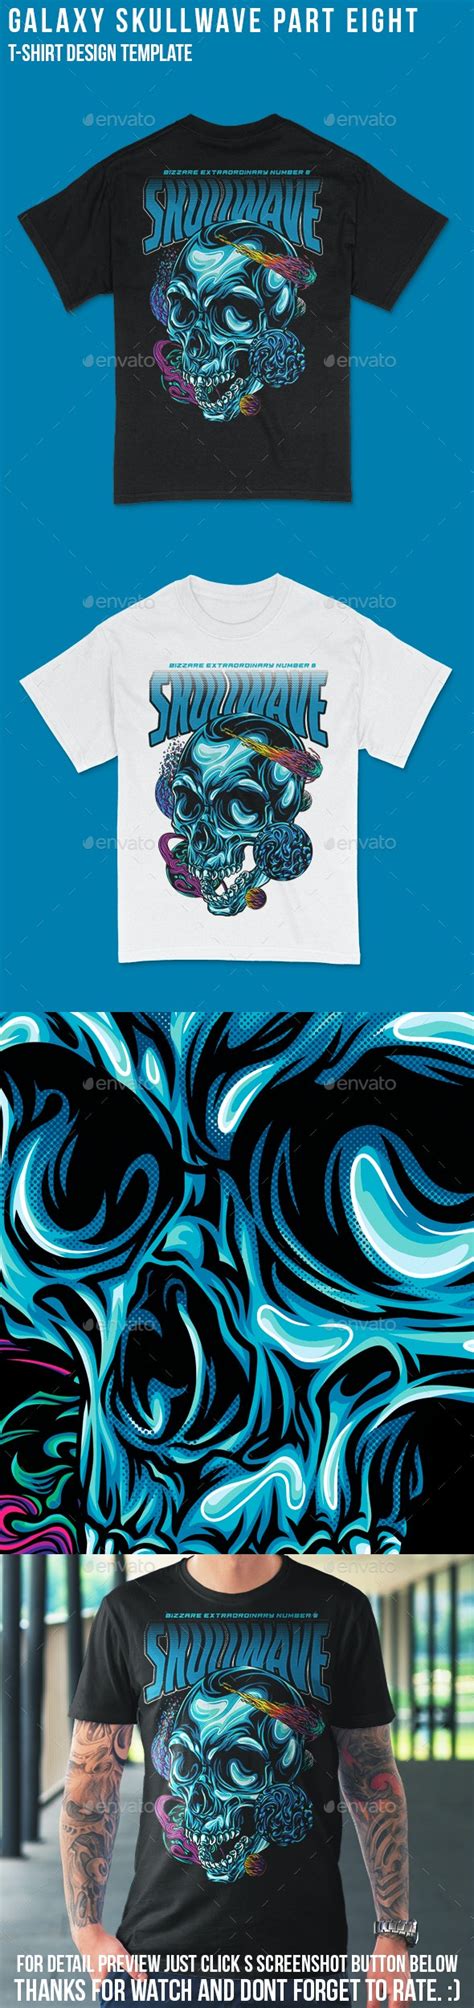 Skullwave In Space Part 8 T Shirt Design Template By Badsyxn Graphicriver